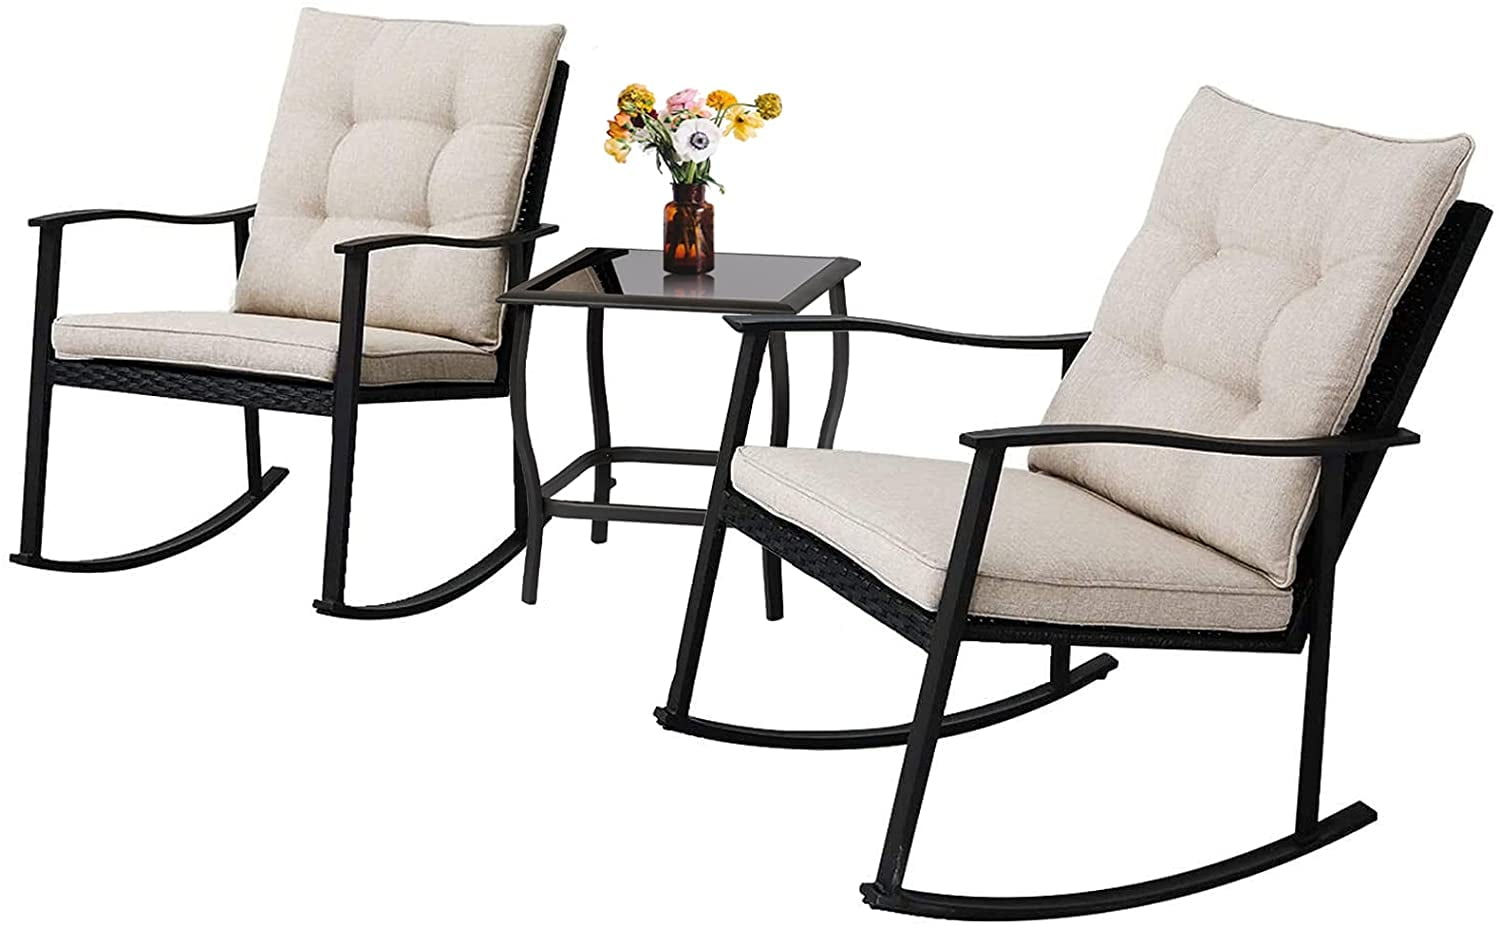 SUNCROWN Outdoor 3-Piece Rocking Bistro Set Brown Cushion Black Wicker Furniture-Two Chairs with Glass Coffee Table 